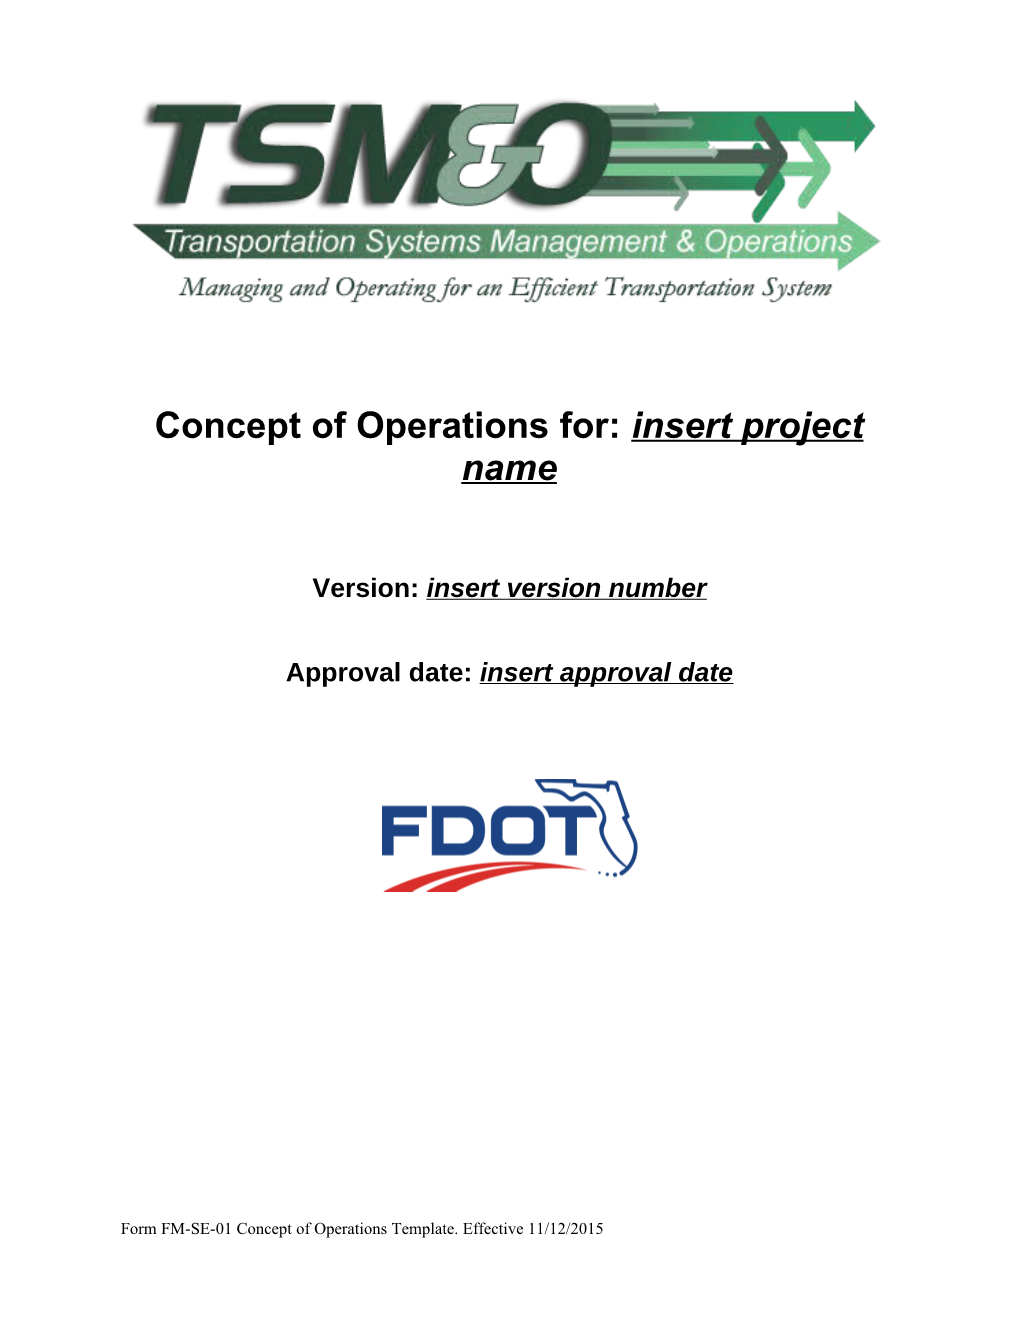 Concept of Operations For:Insert Project Name